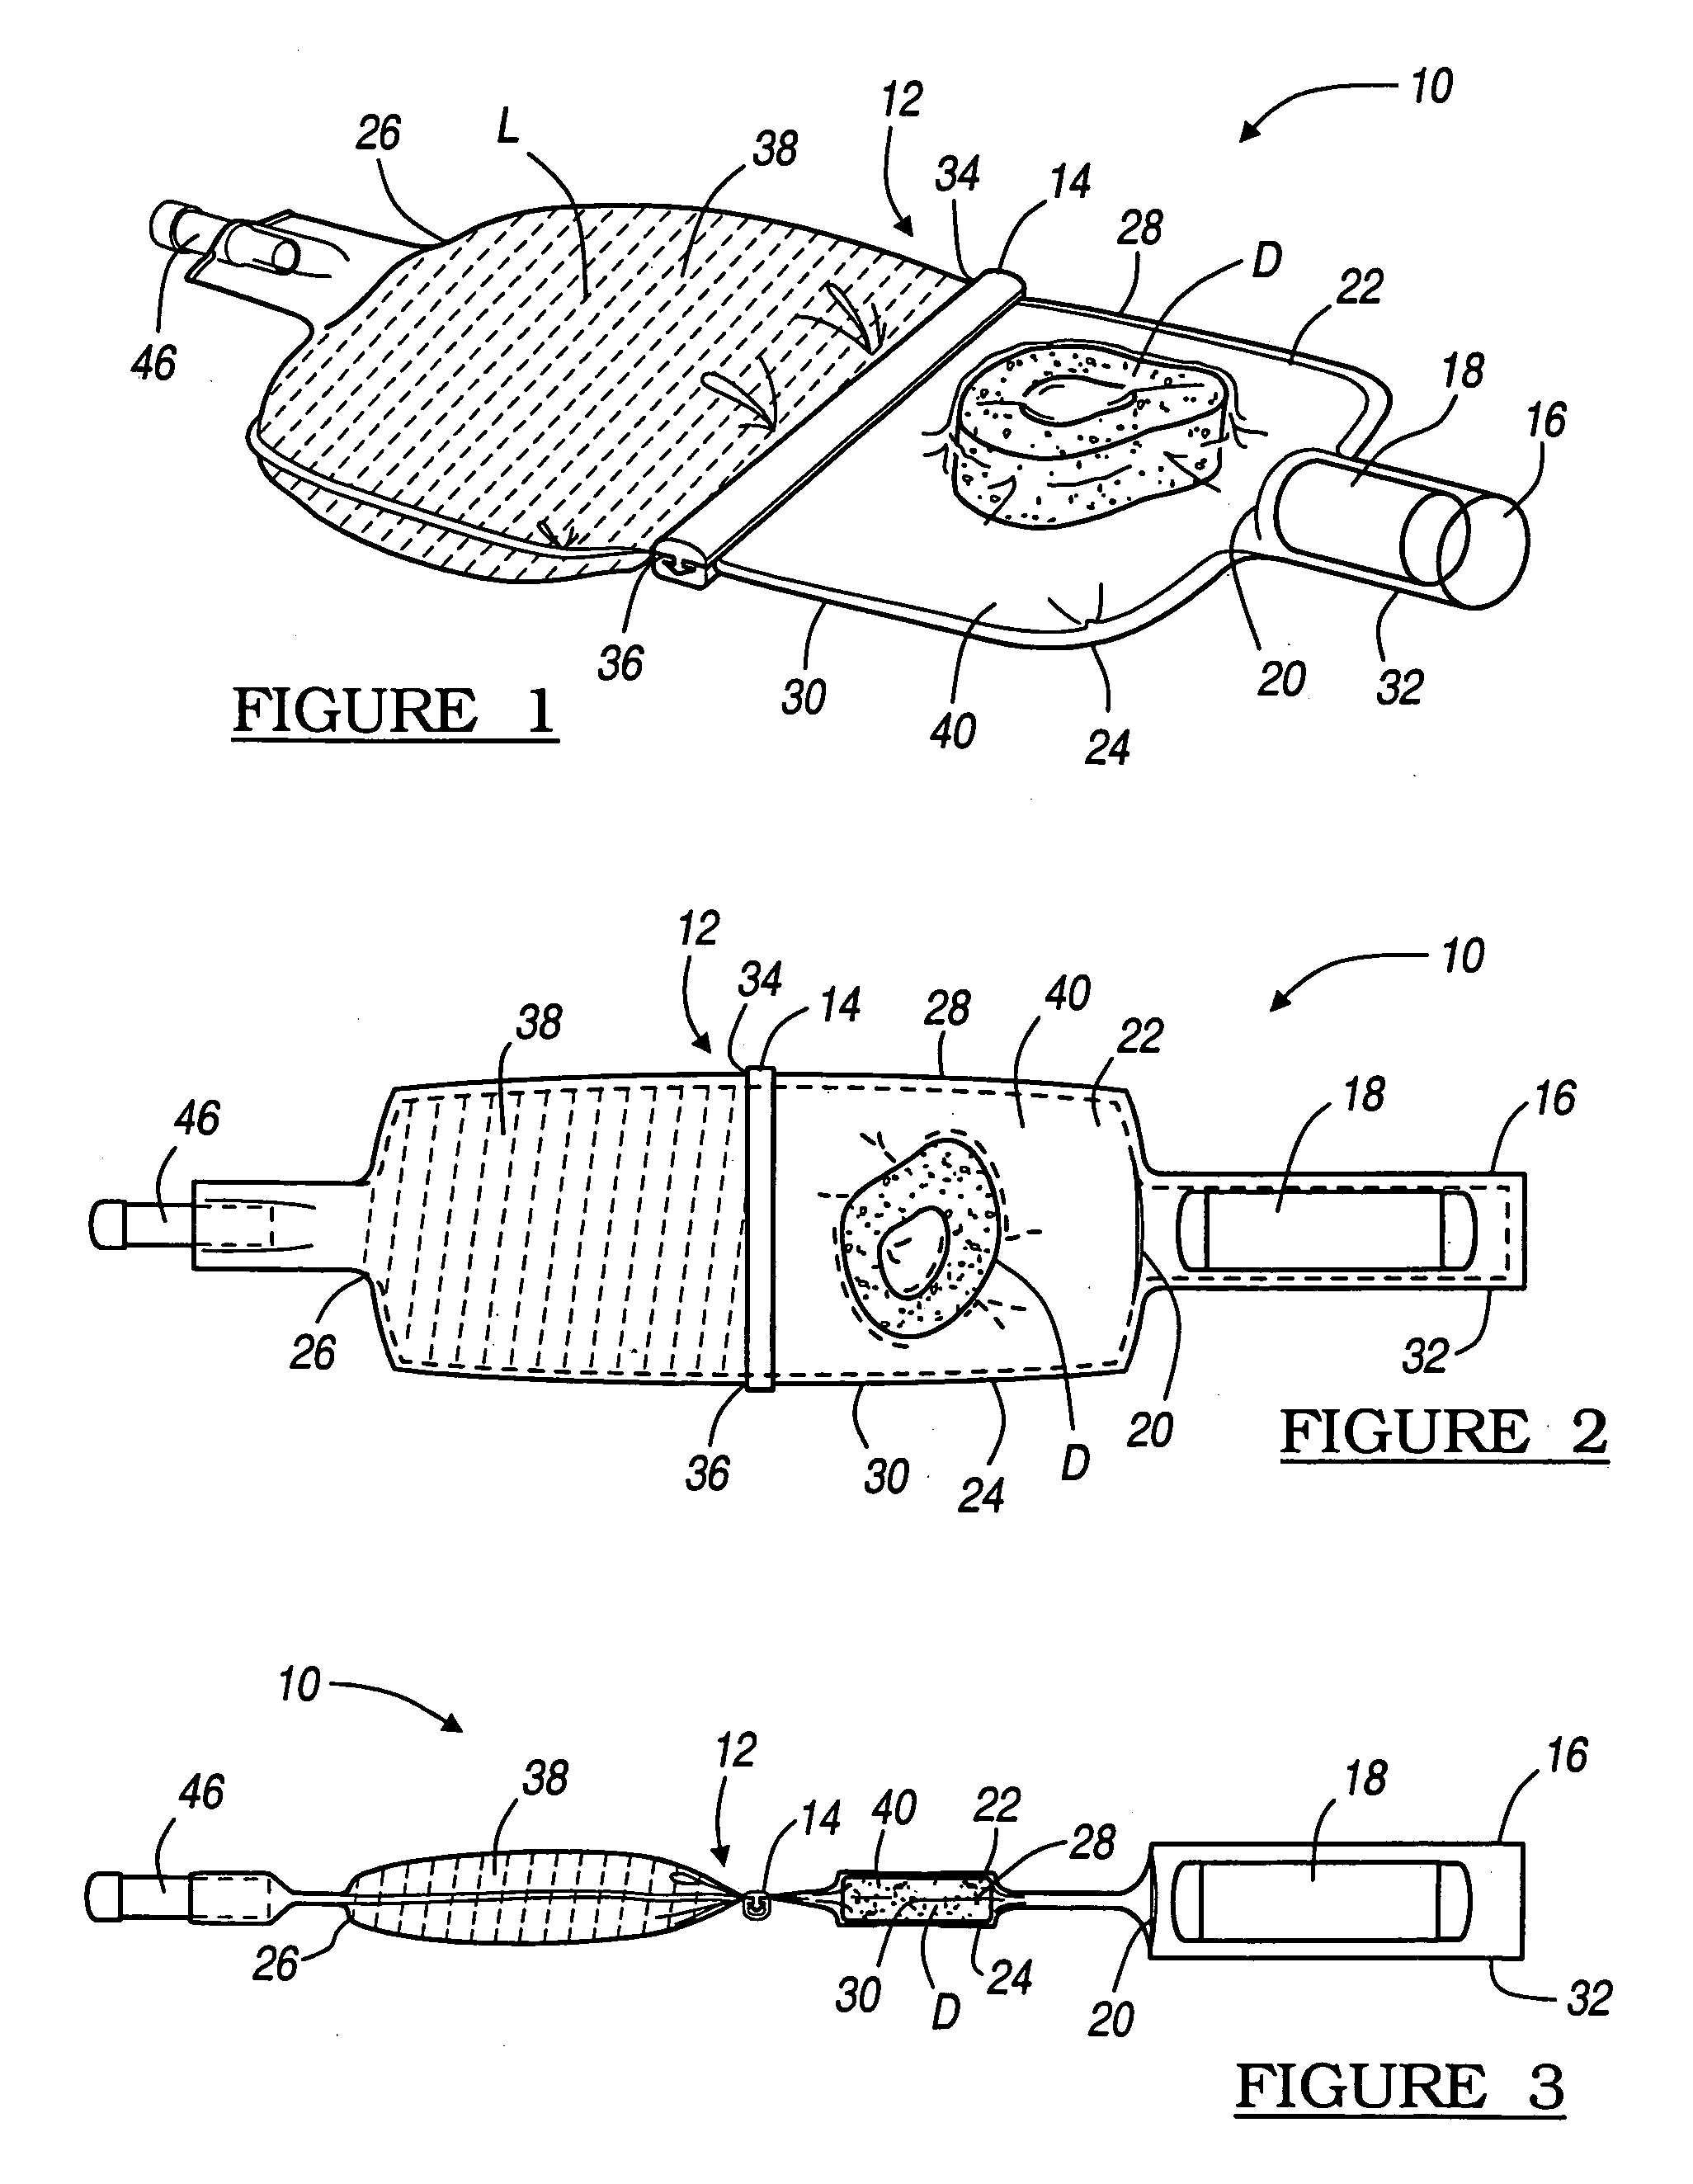 Device and method for hydrating and rehydrating orthopedic graft materials